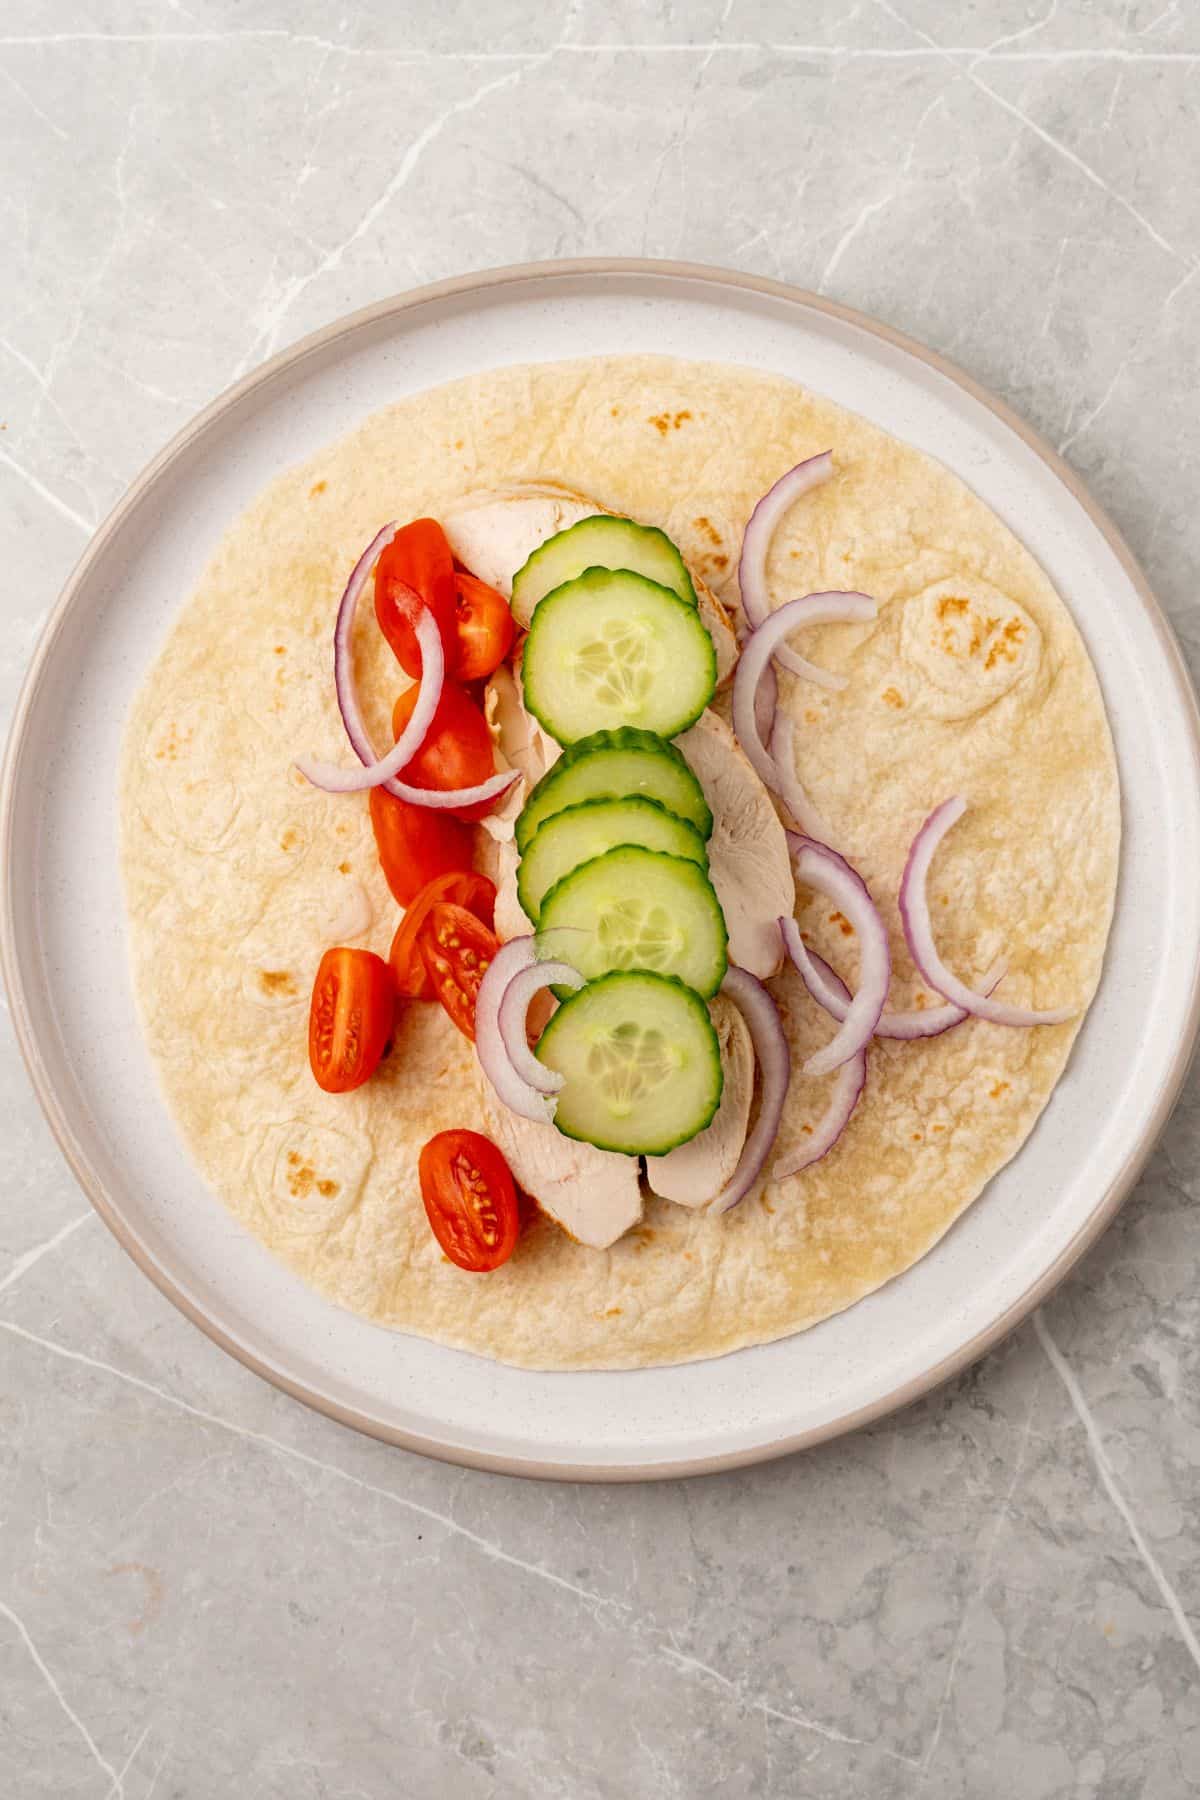 A Greek wrap with chicken, vegetables and meat on it.